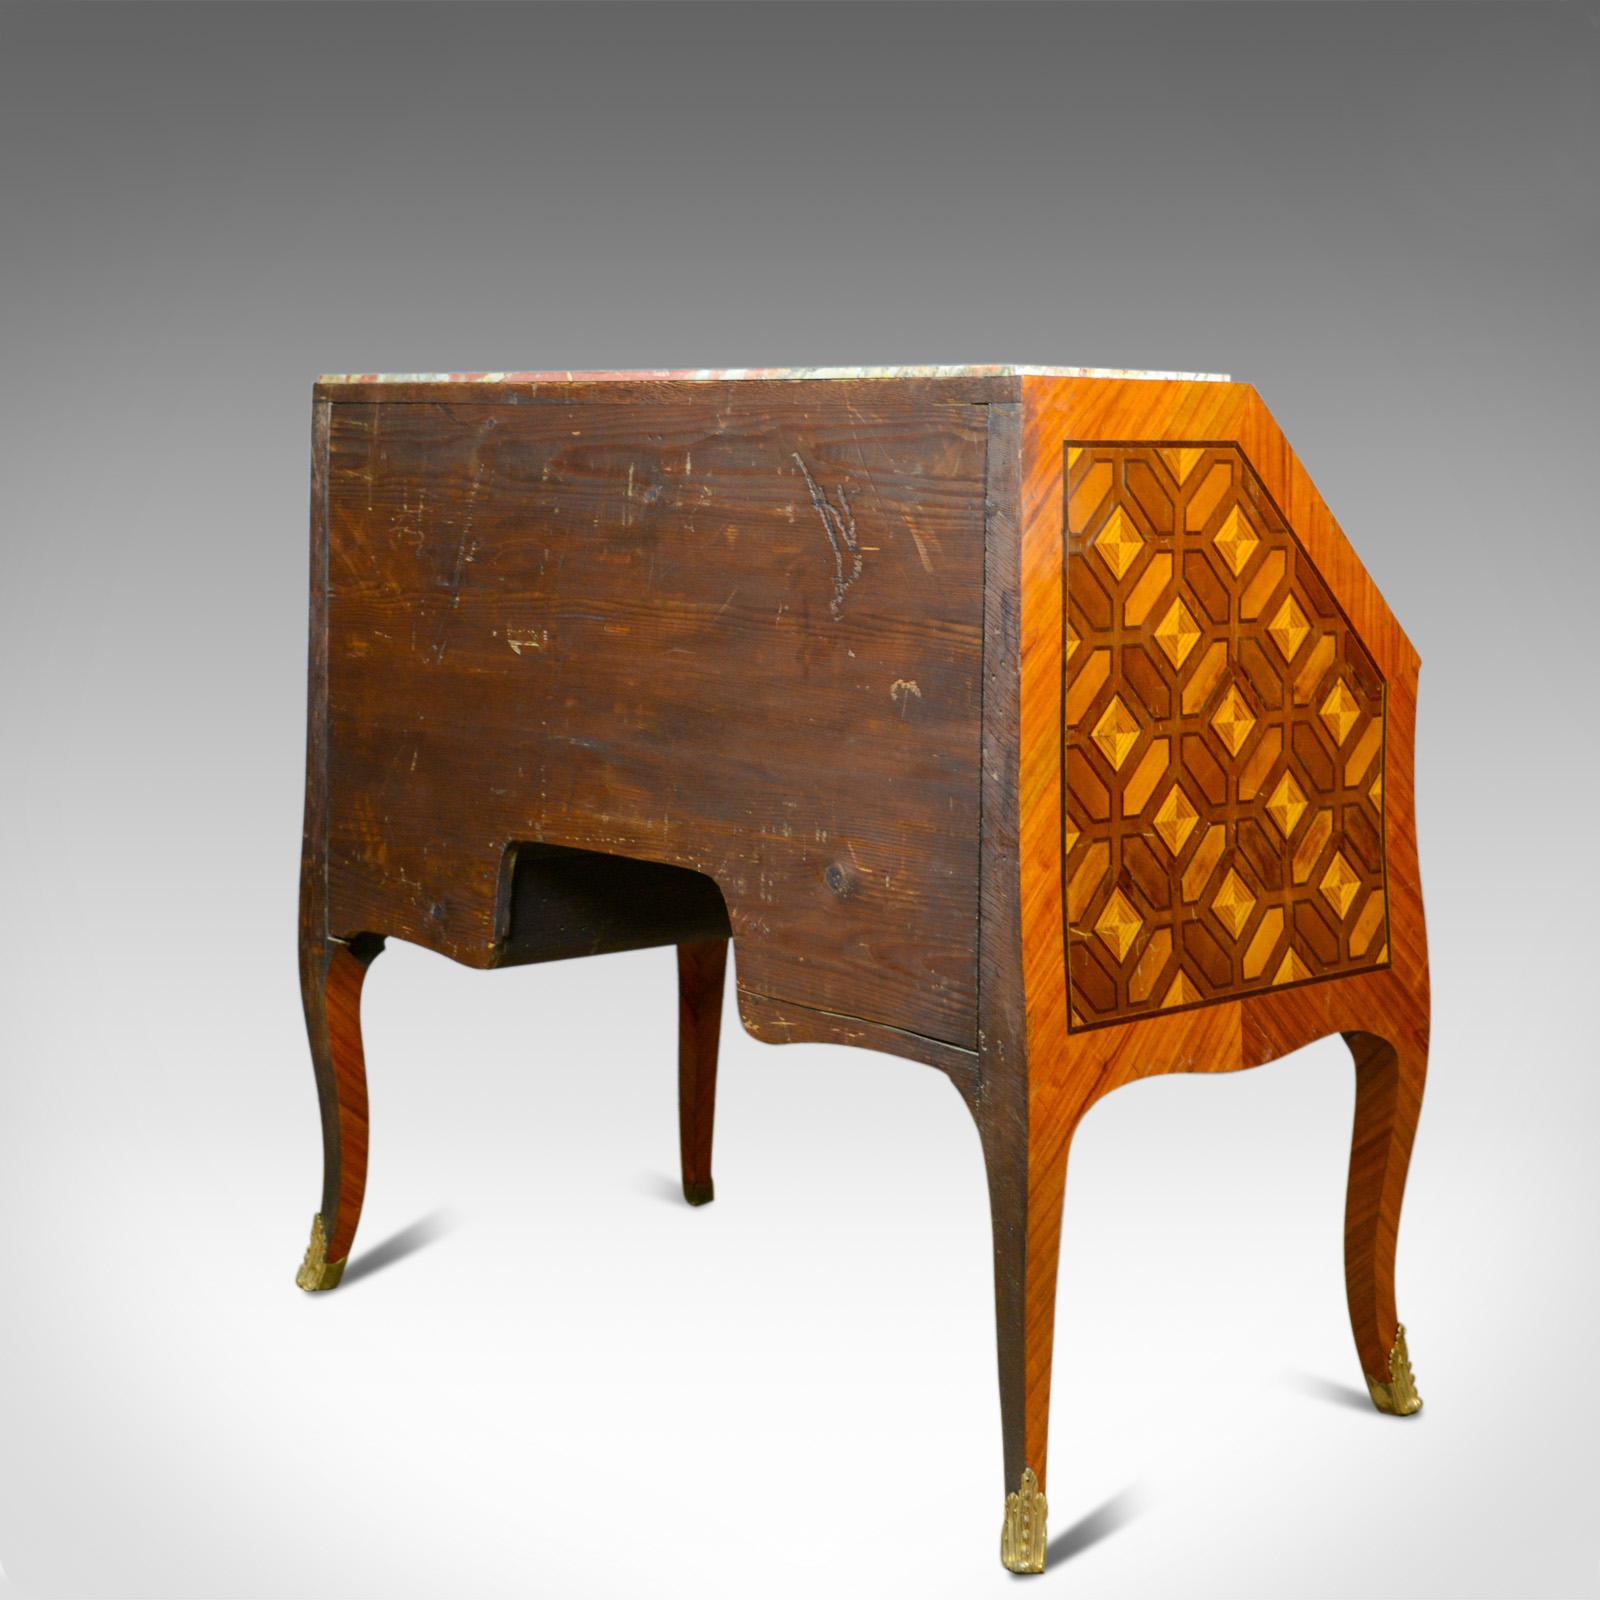 Antique Bureau, French, Marble Top, Kingwood, Marquetry Desk, circa 1900 In Good Condition For Sale In Hele, Devon, GB